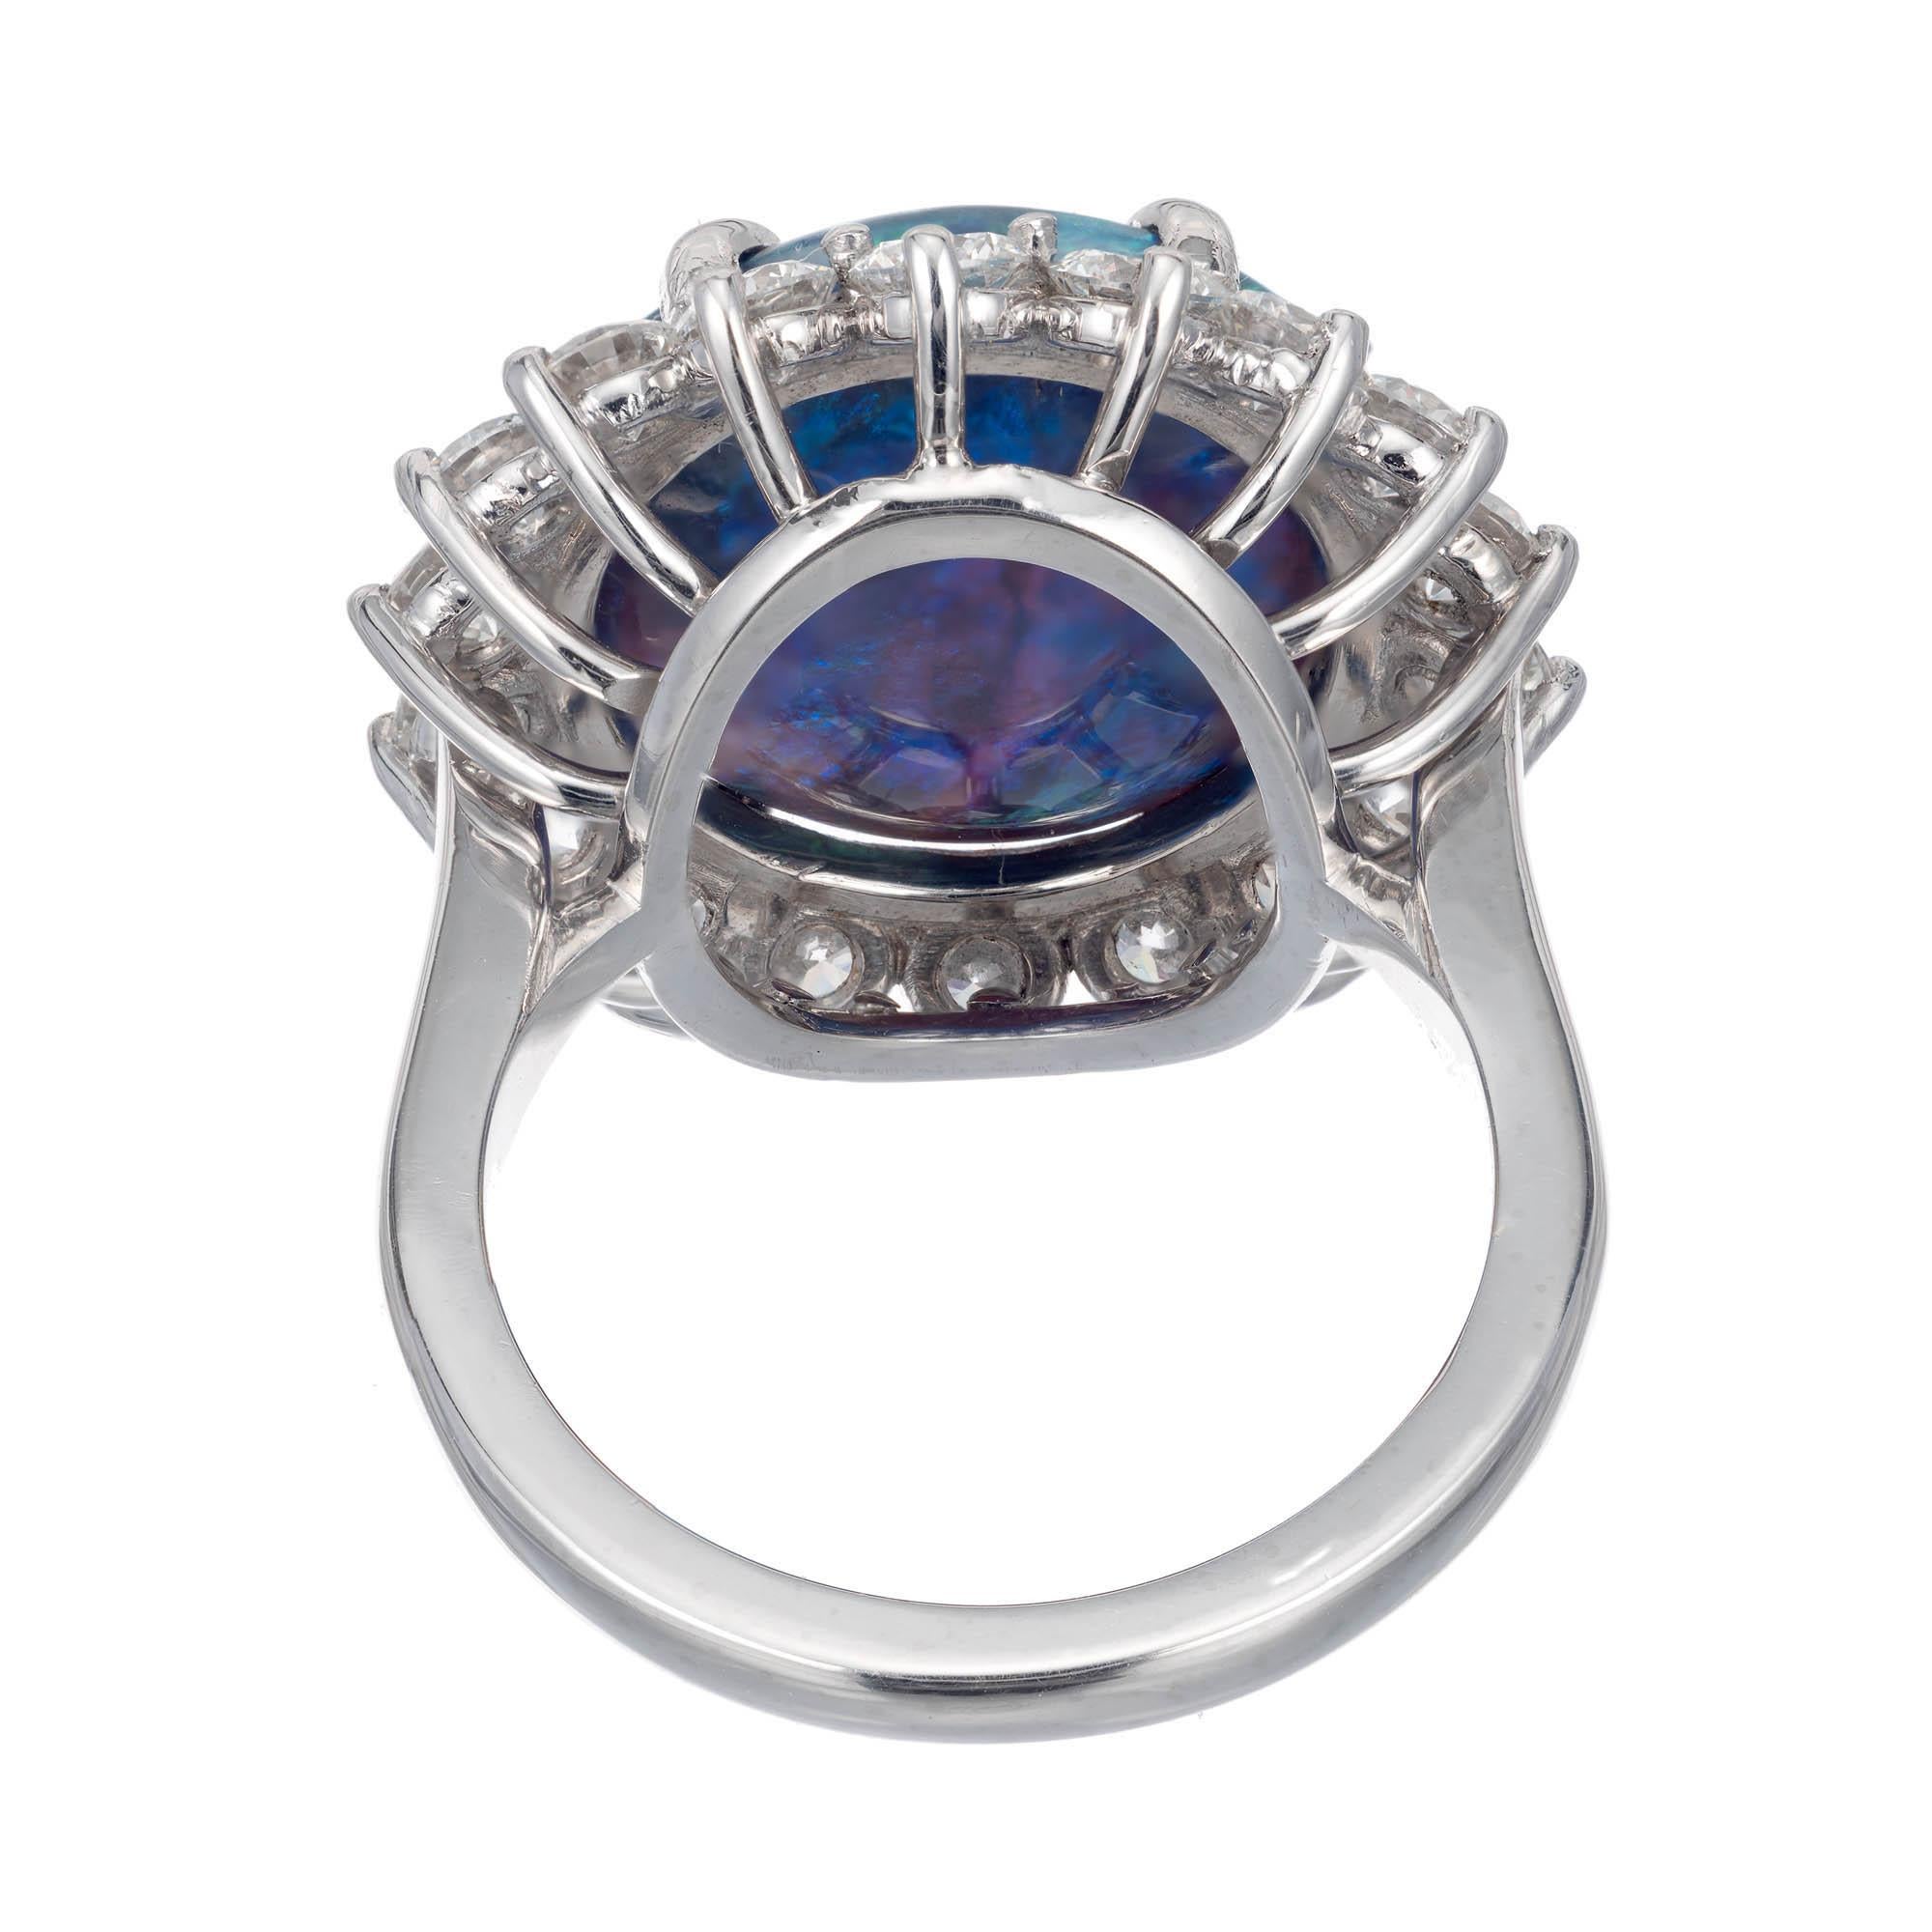 Peter Suchy GIA Certified 7.55 Carat Black Opal Diamond Platinum Cocktail Ring In New Condition For Sale In Stamford, CT